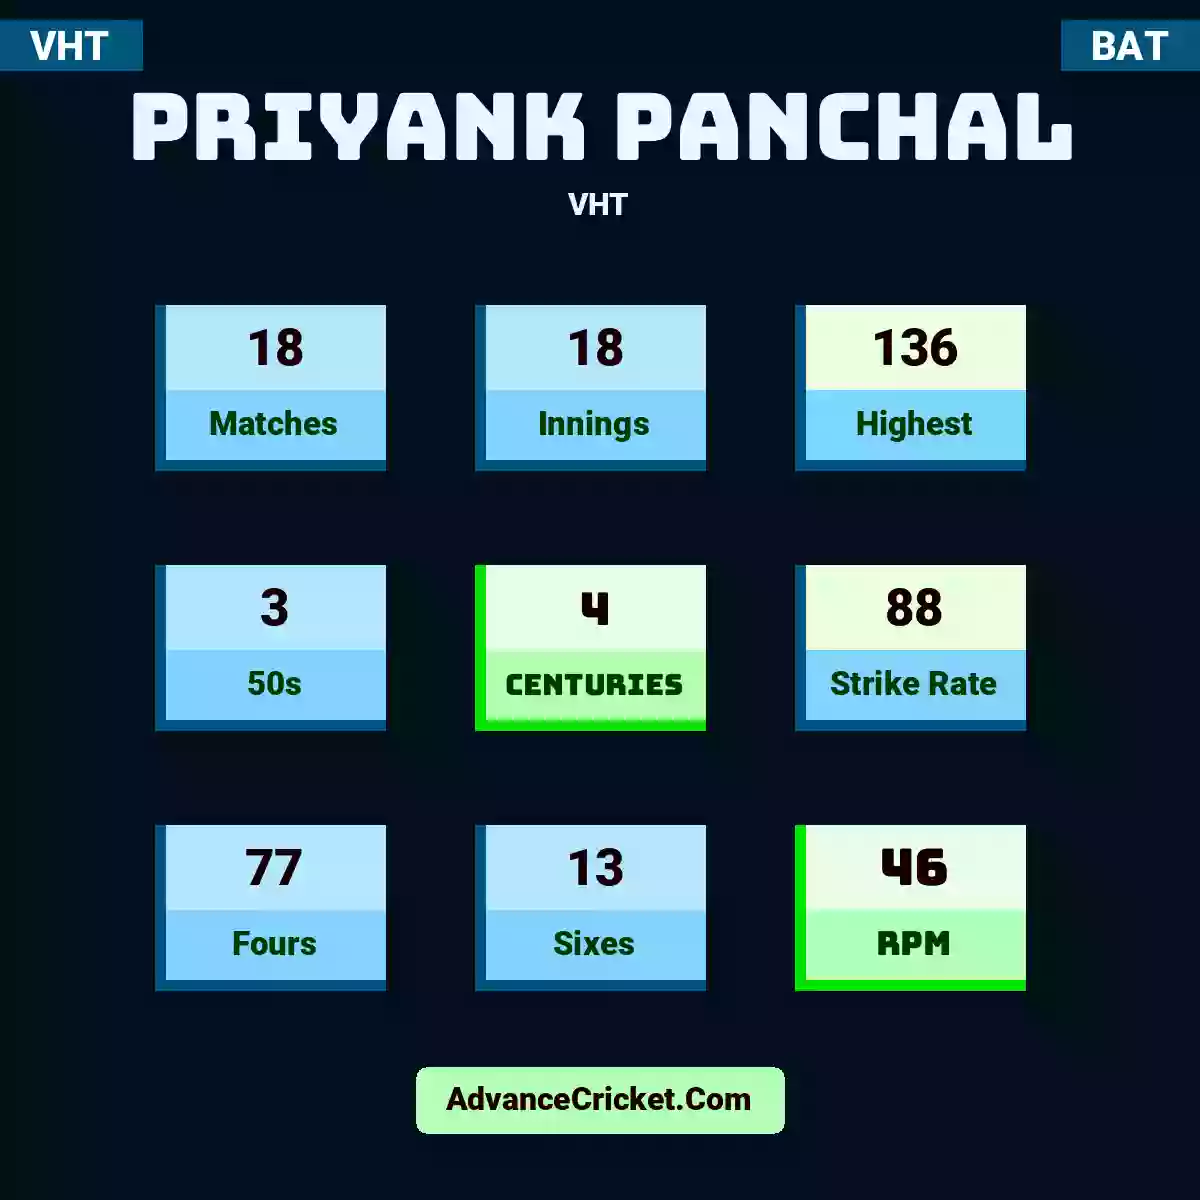 Priyank Panchal VHT , Priyank Panchal played 18 matches, scored 136 runs as highest, 3 half-centuries, and 4 centuries, with a strike rate of 88. P.Panchal hit 77 fours and 13 sixes, with an RPM of 46.